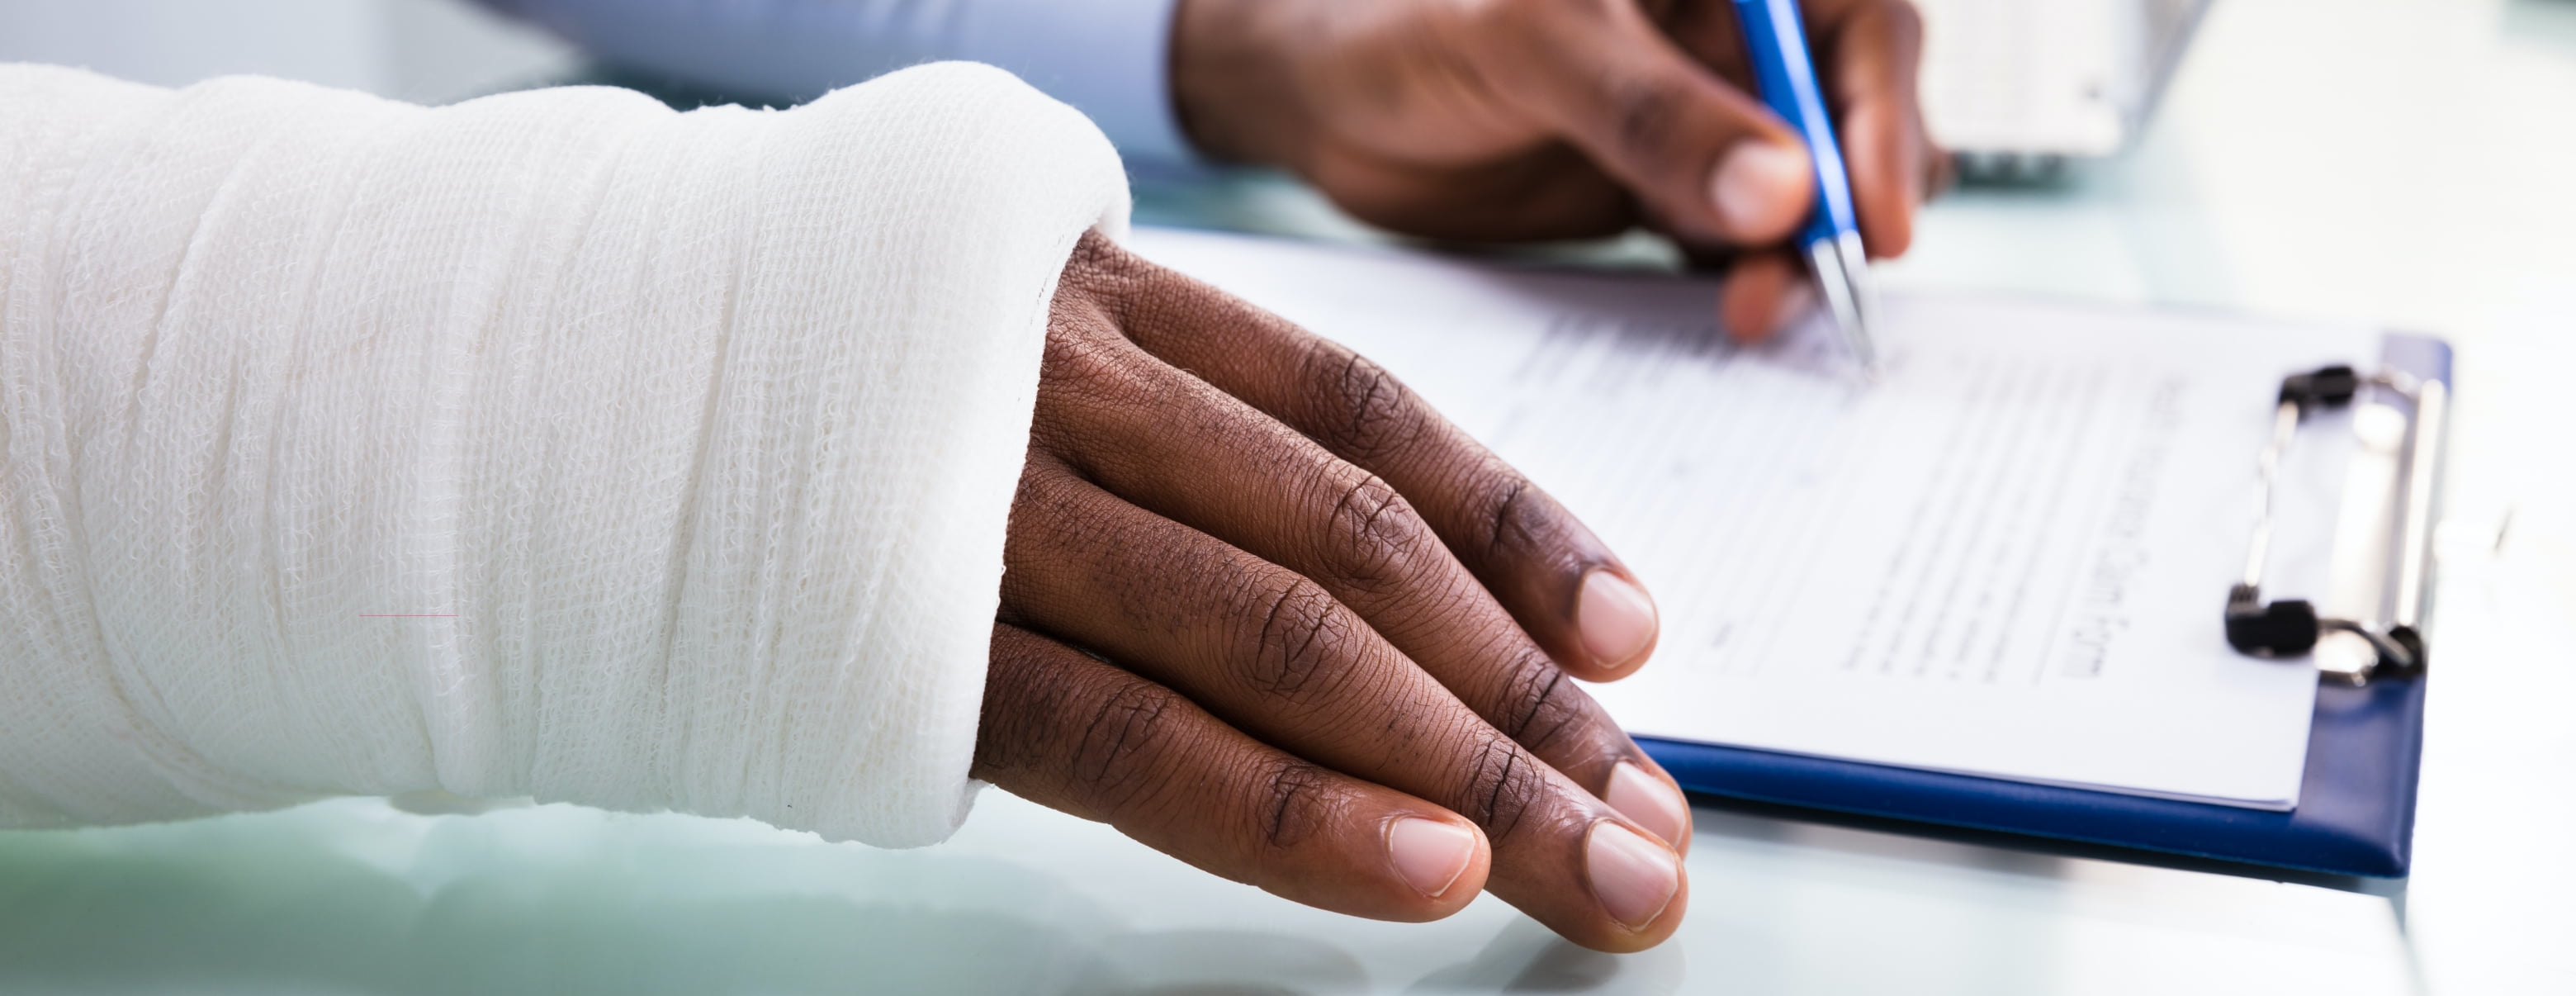 Injured employee with hand in cast - workers' compensation Nevada